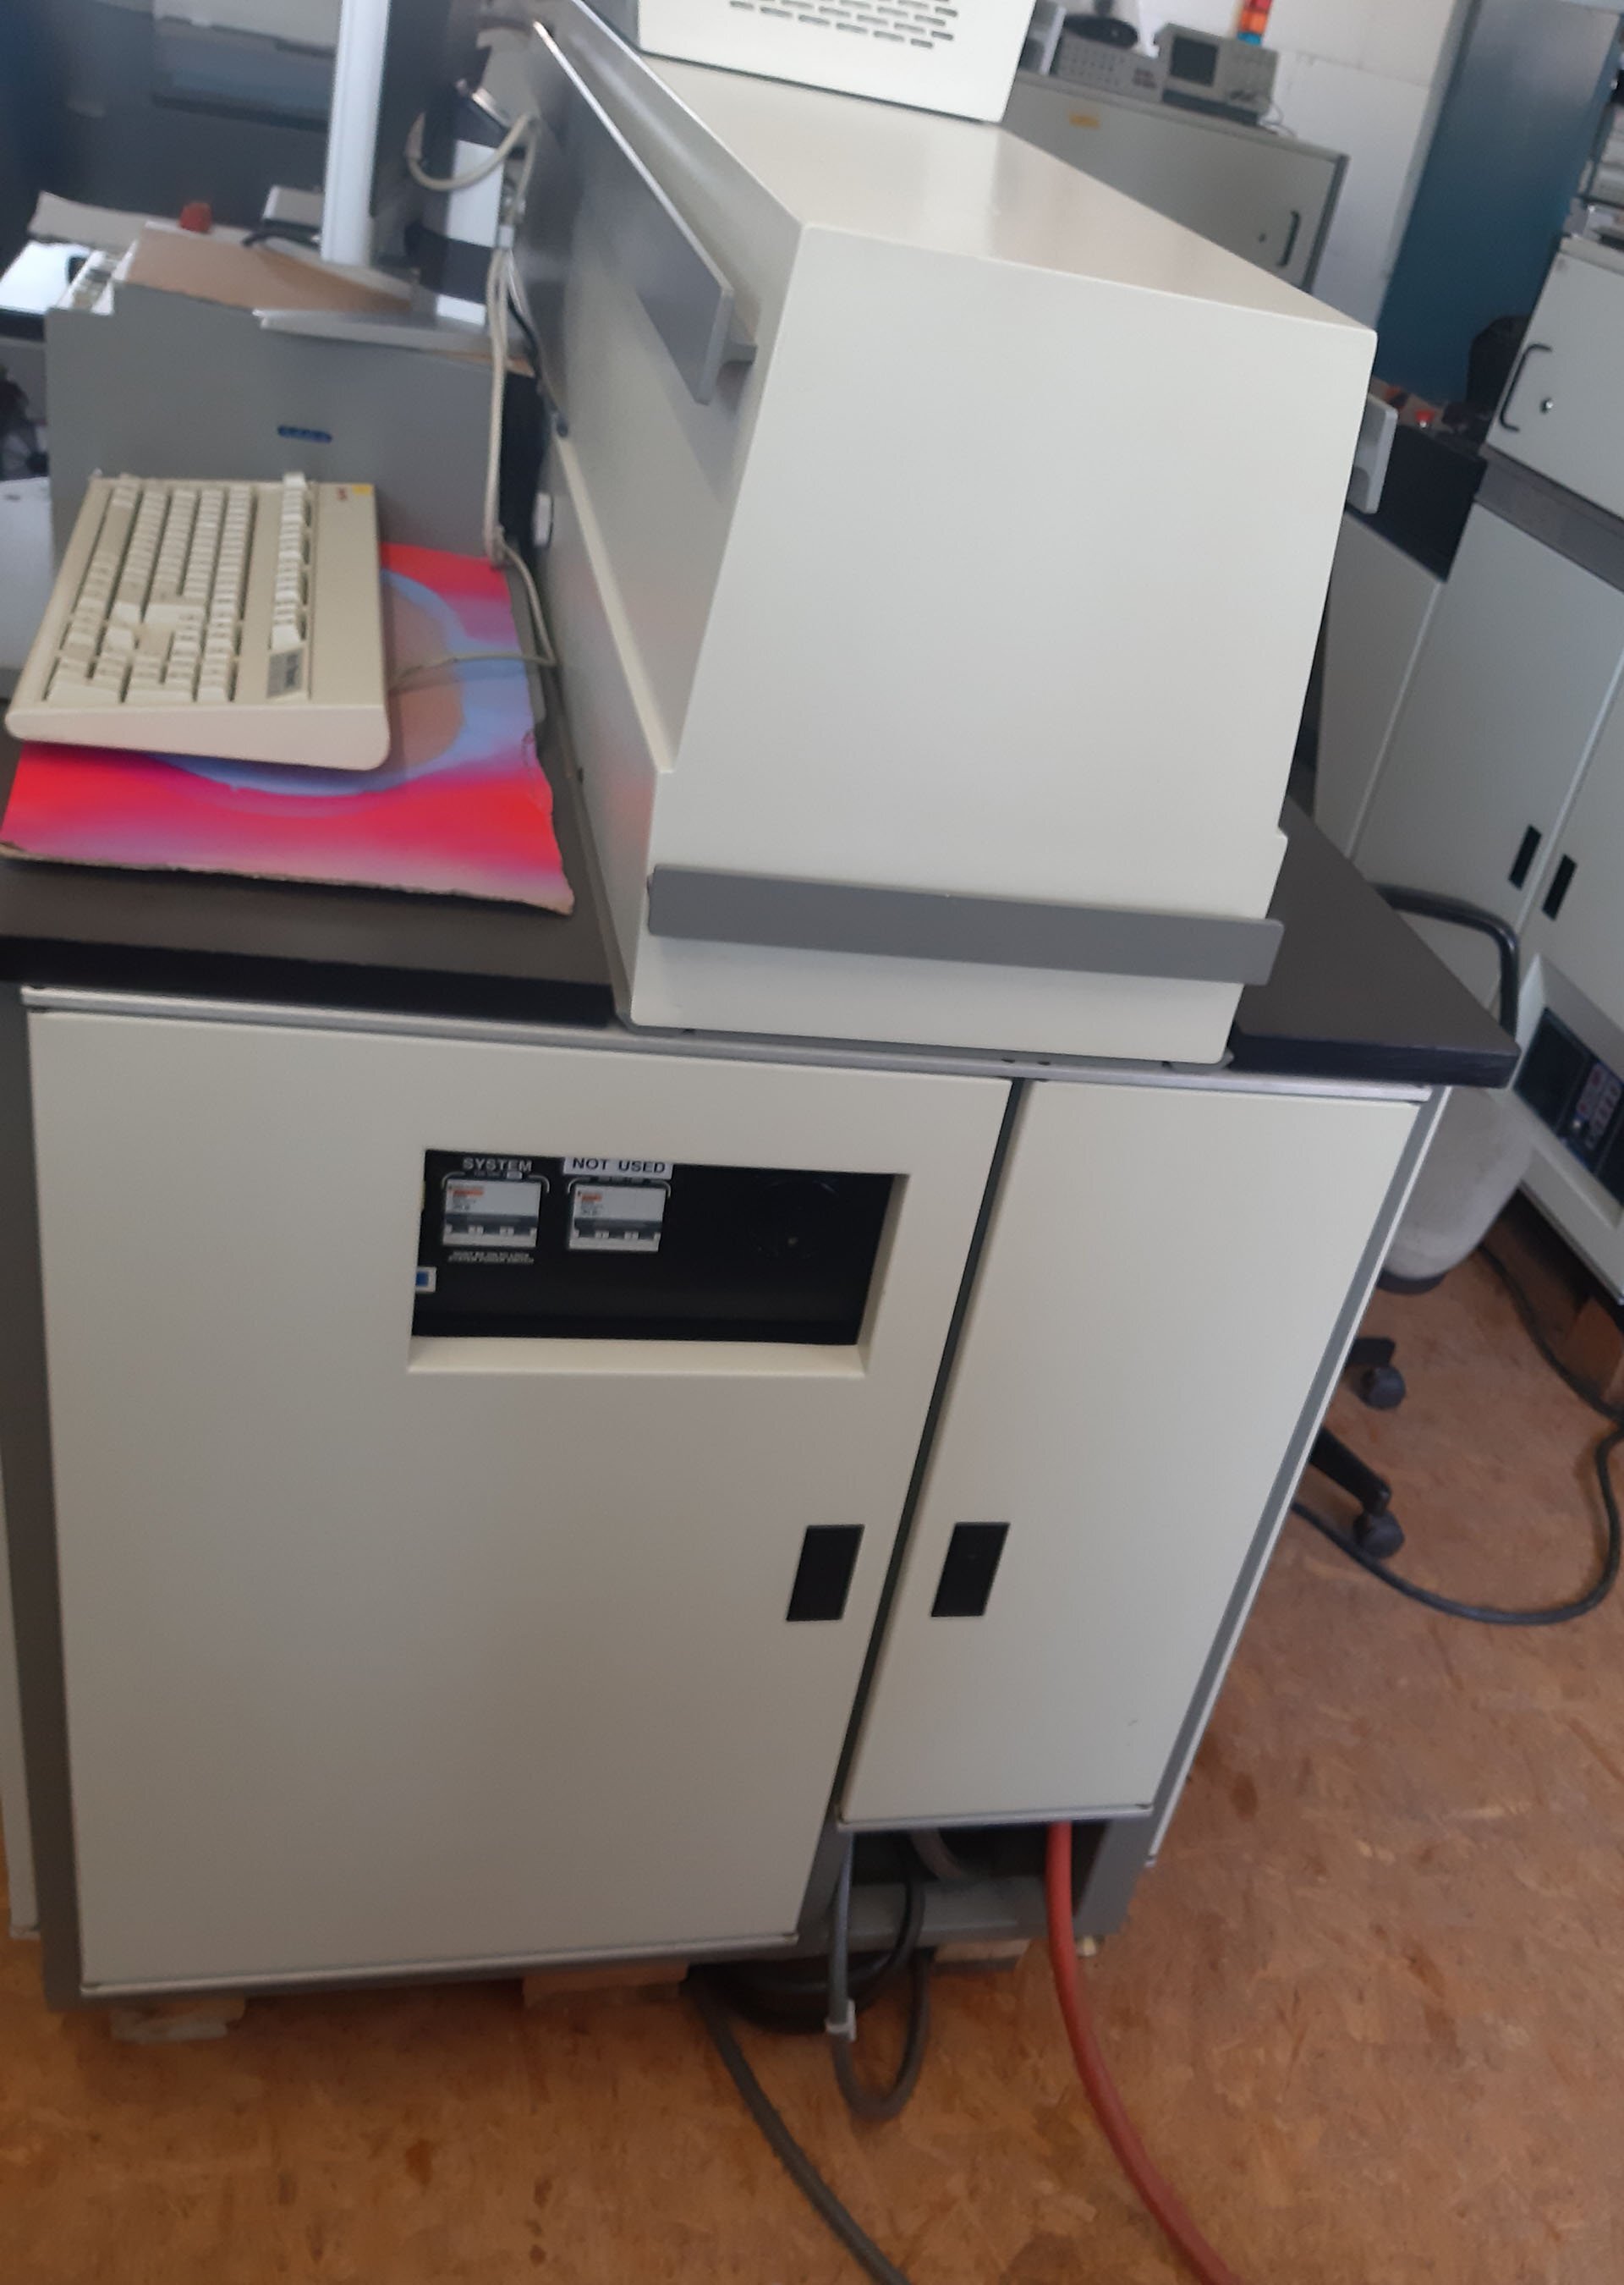 Photo Used ESI 4300 For Sale